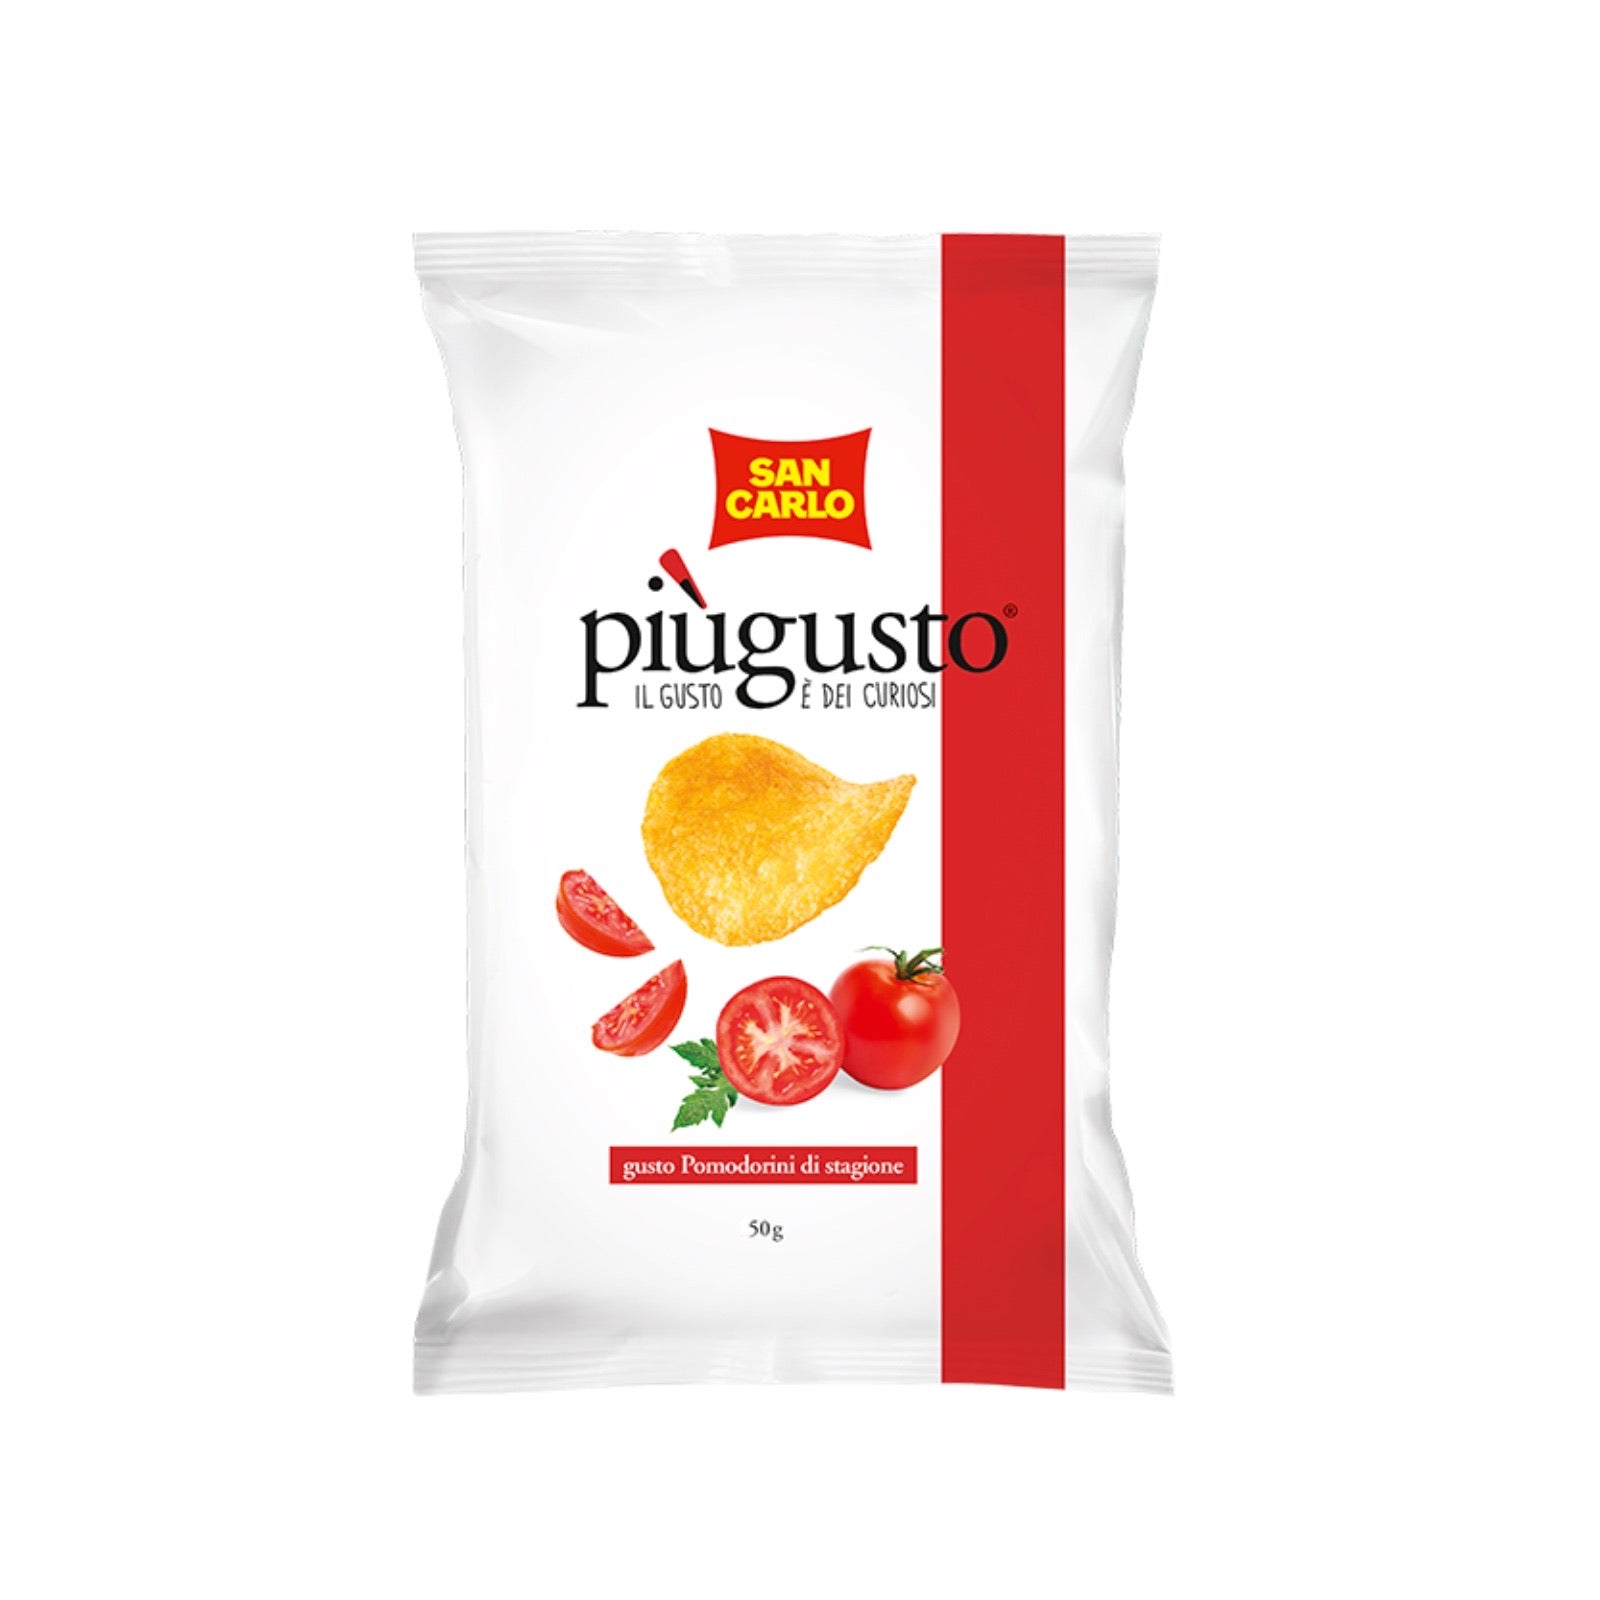 San Carlo Potato Chips with tomatoes Flavor 150g